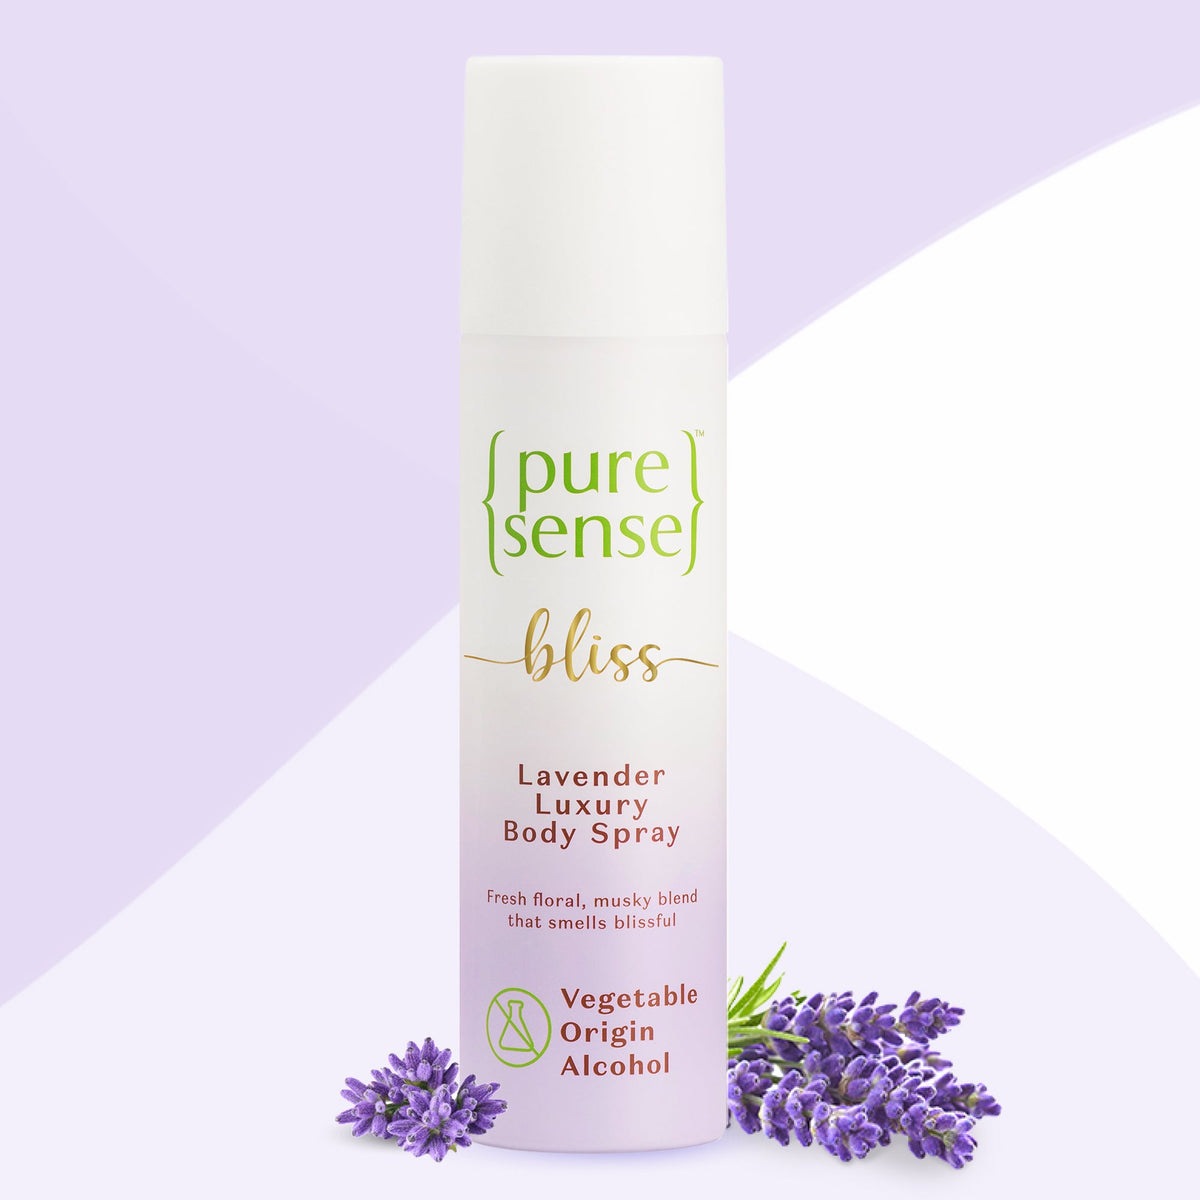 [CRED] Bliss Lavender Luxury Body Spray | From the makers of Parachute Advansed | 150ml